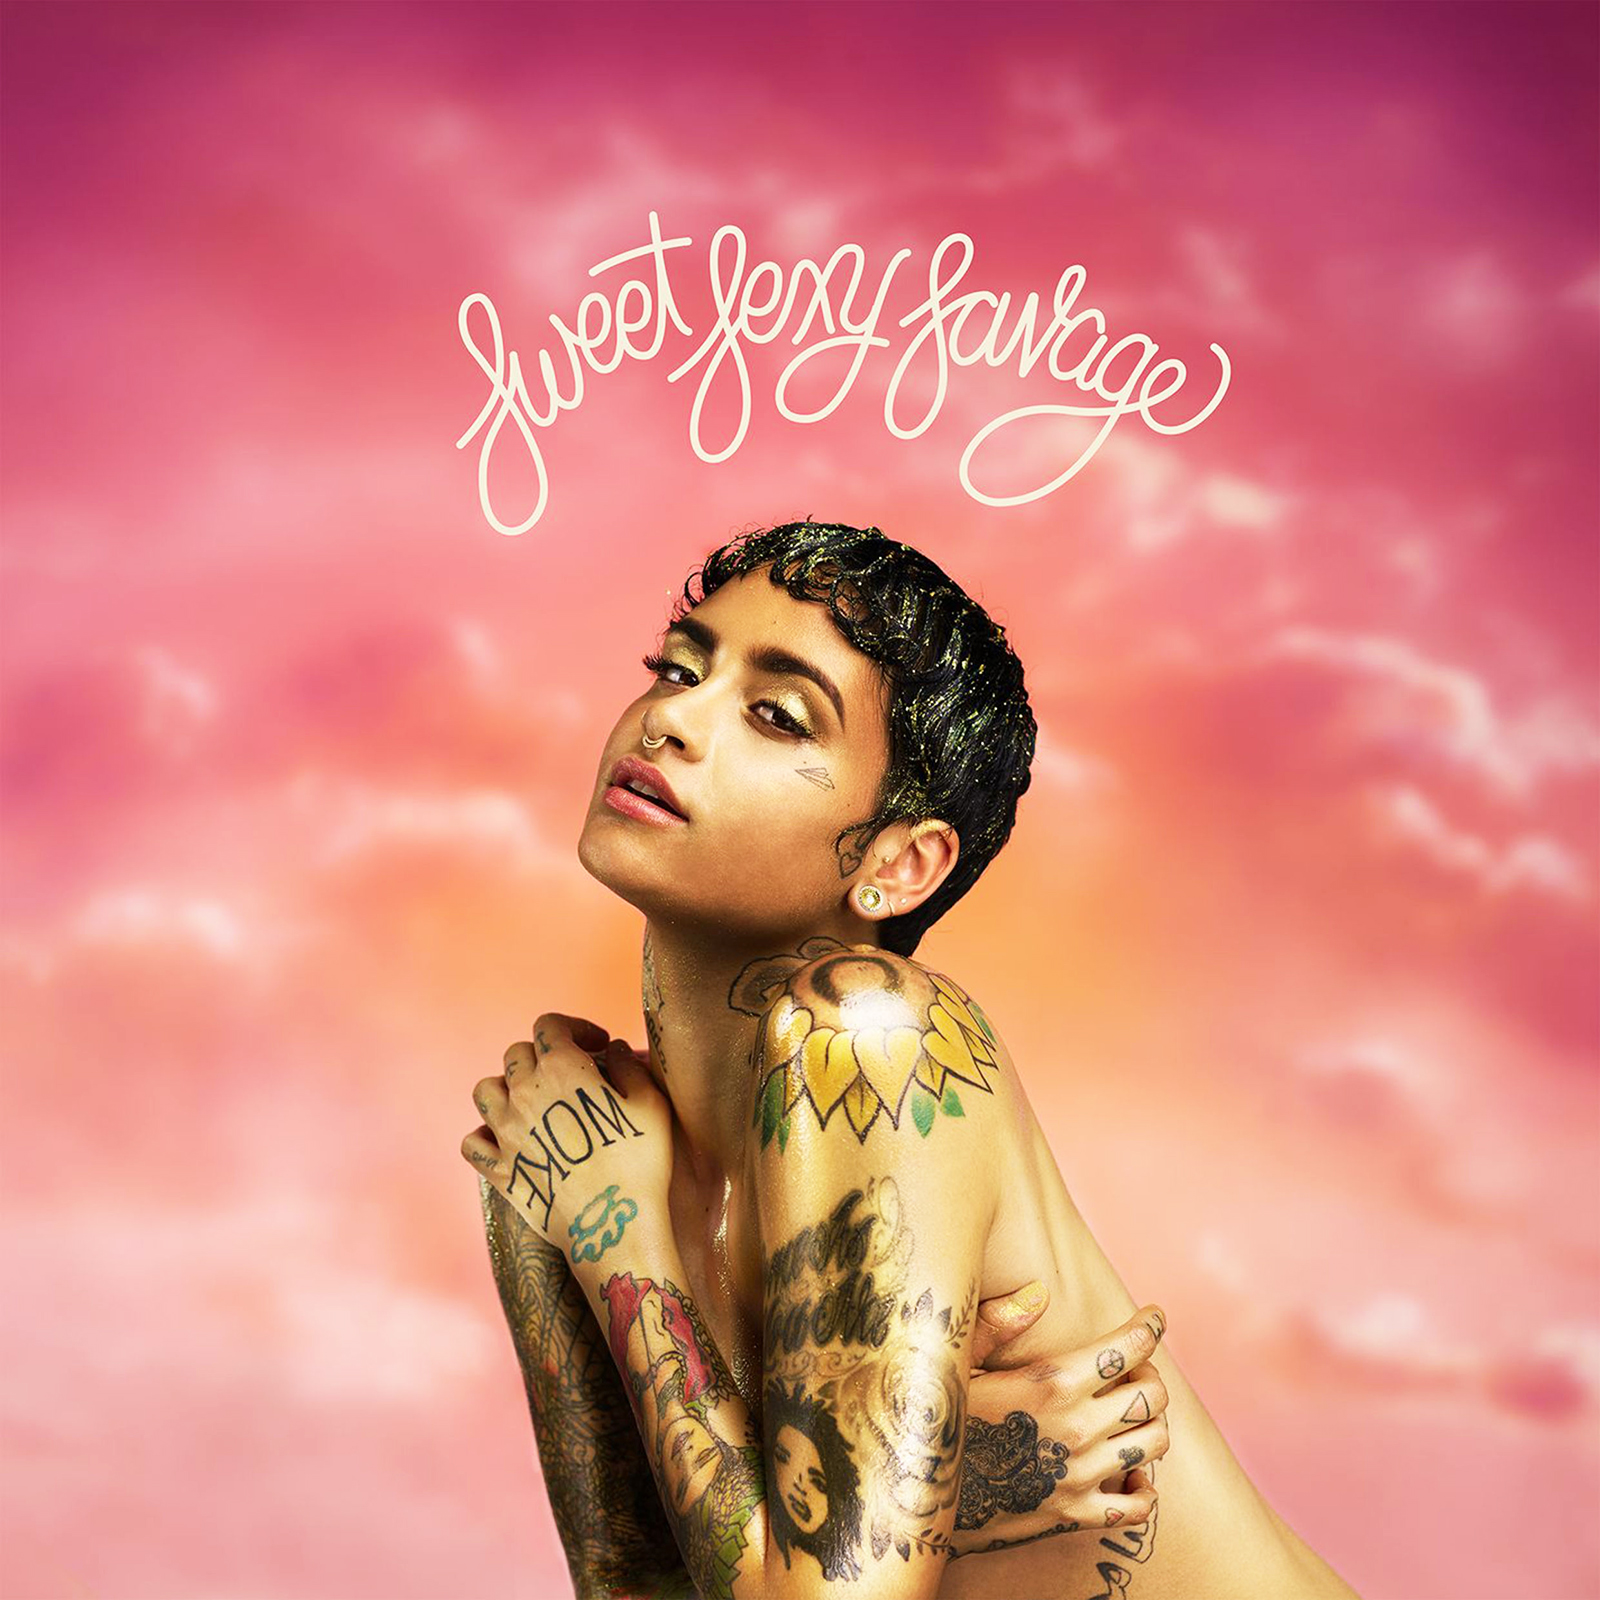 Kehlani releases her new album “SweetSexySavage” Friday following her 2015 Grammy-nominated mixtape, “You Should Be Here." PHOTO COURTESY ATLANTIC RECORDS